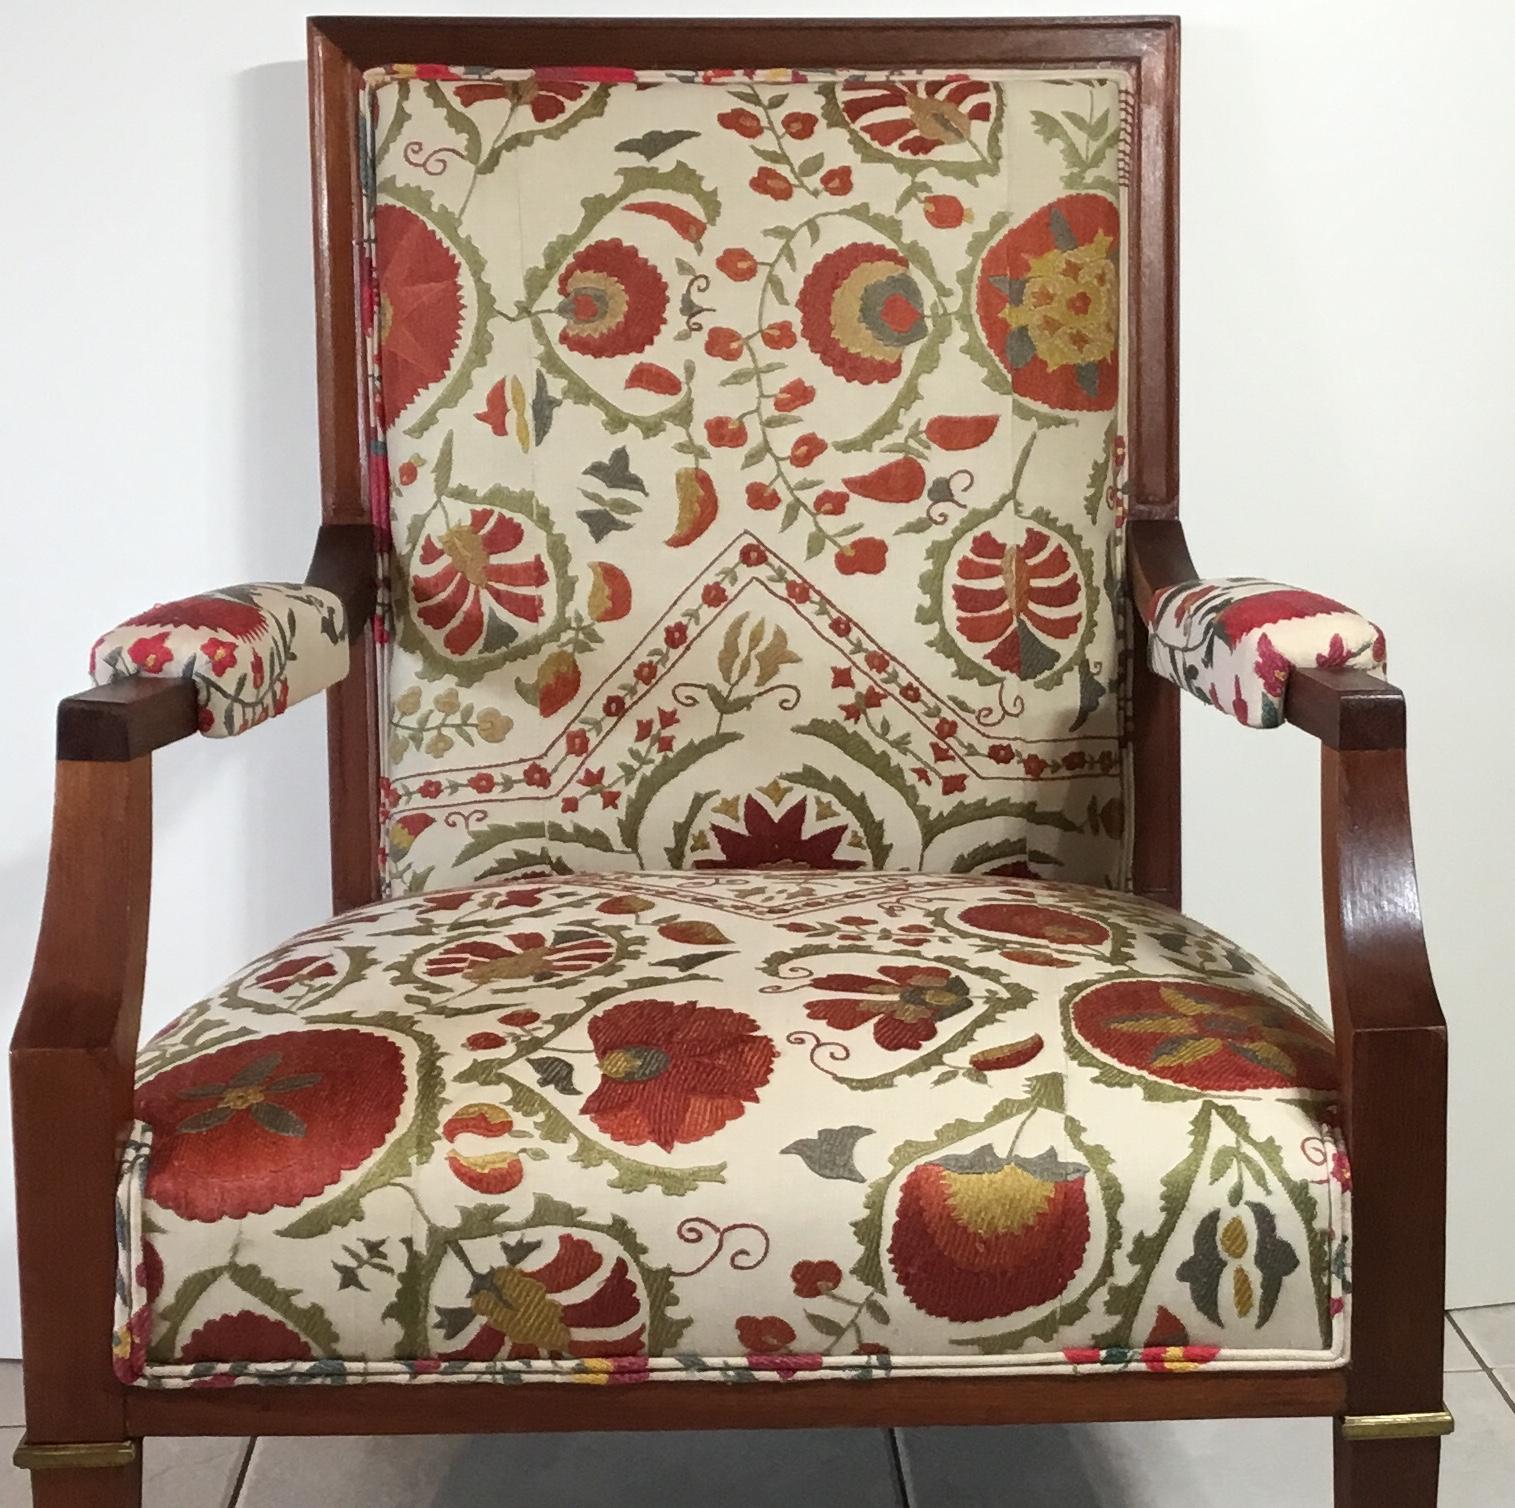 Fantastic hand carve French wood armchair from the 1940s, professionally restored, newly upholsted with beautiful vintage hand embroidery Suzani textile. The Suzani textile is silk embroidery of colorful flowers and vines motifs on a cream color